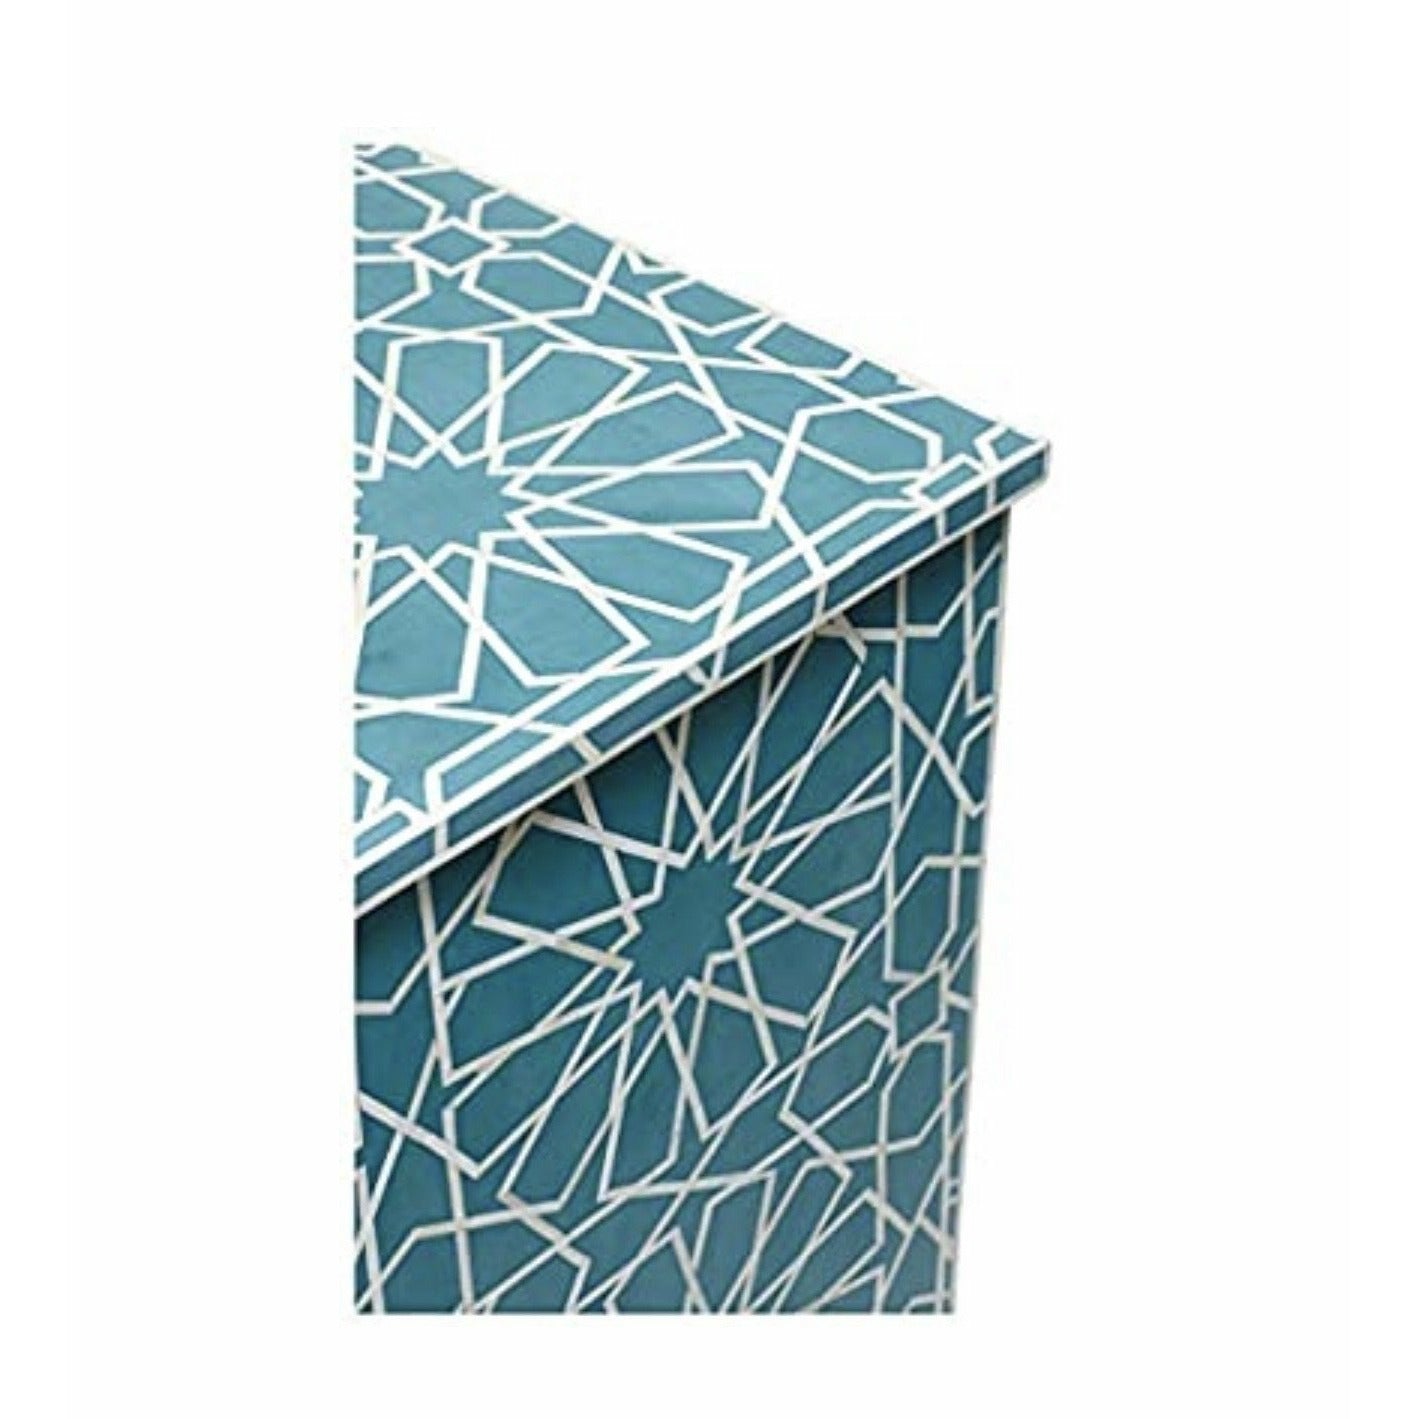 Cyrus Chest of Drawers - Blue Bone Inlay